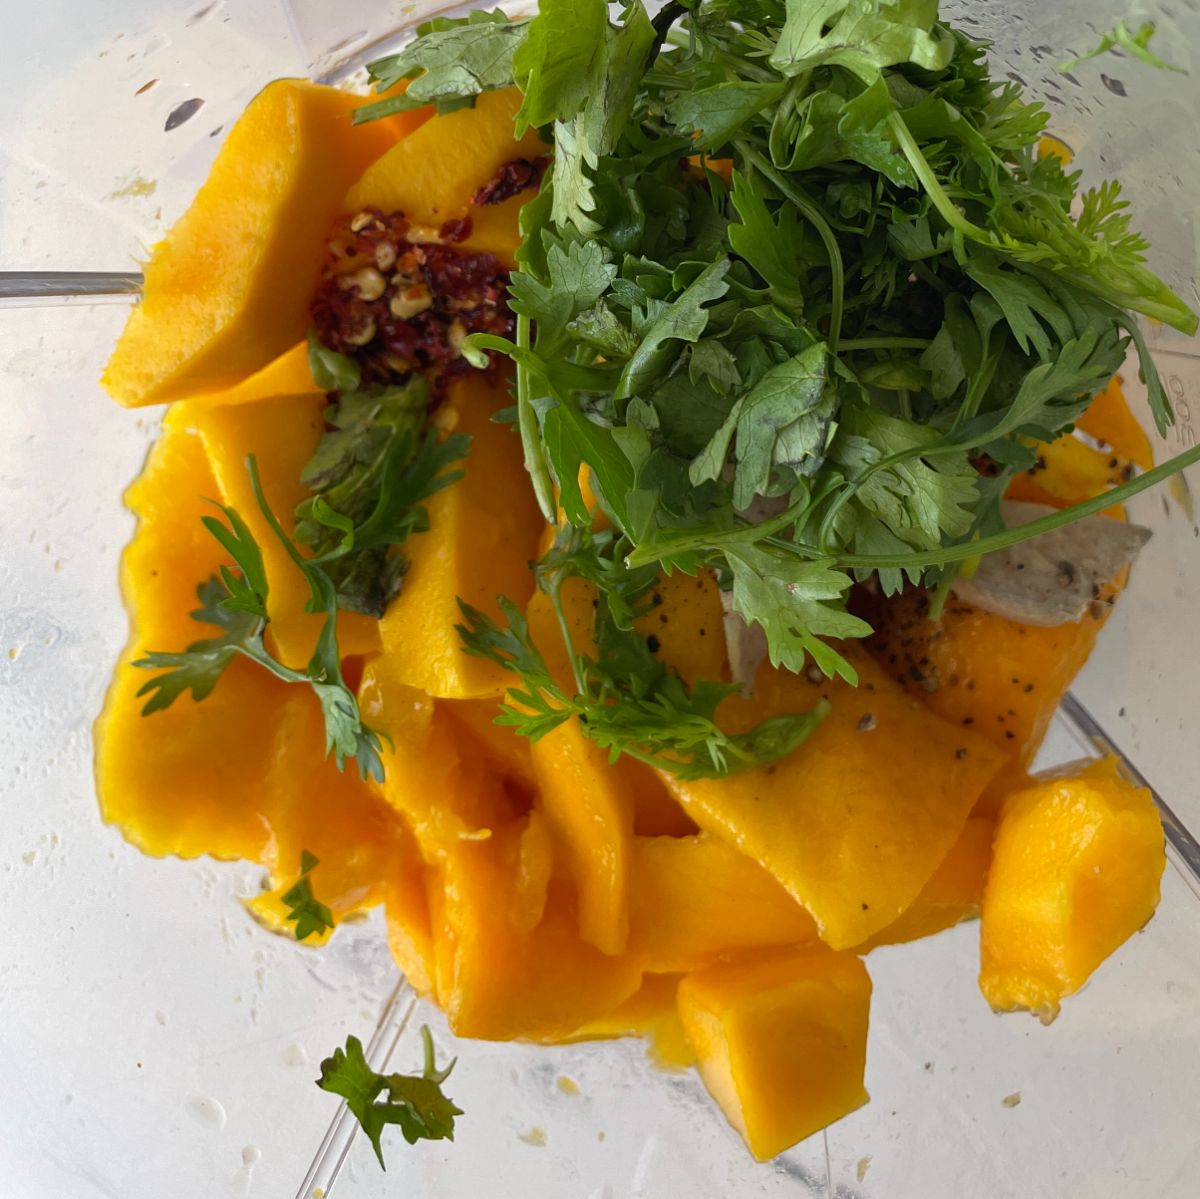 combine mango pieces and other ingredients into the bowl 